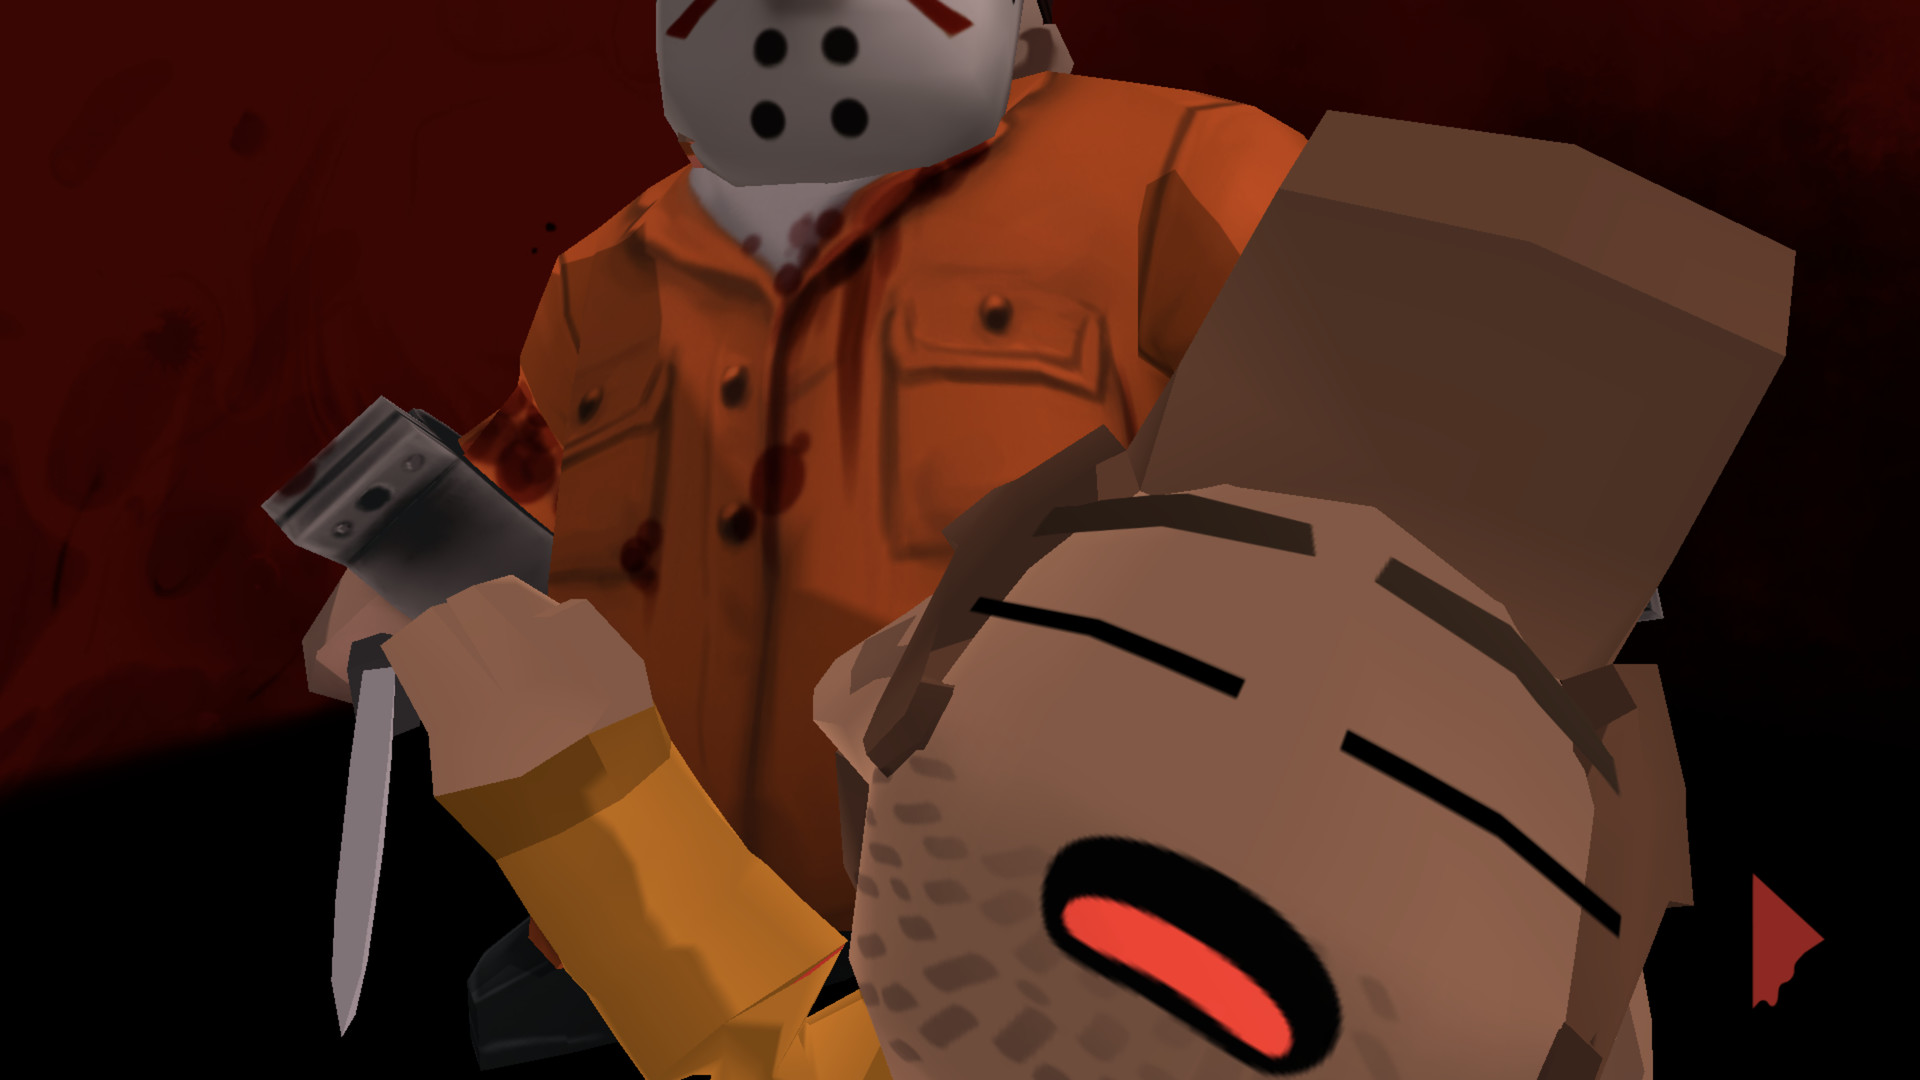 Friday the 13th: Killer Puzzle on Steam